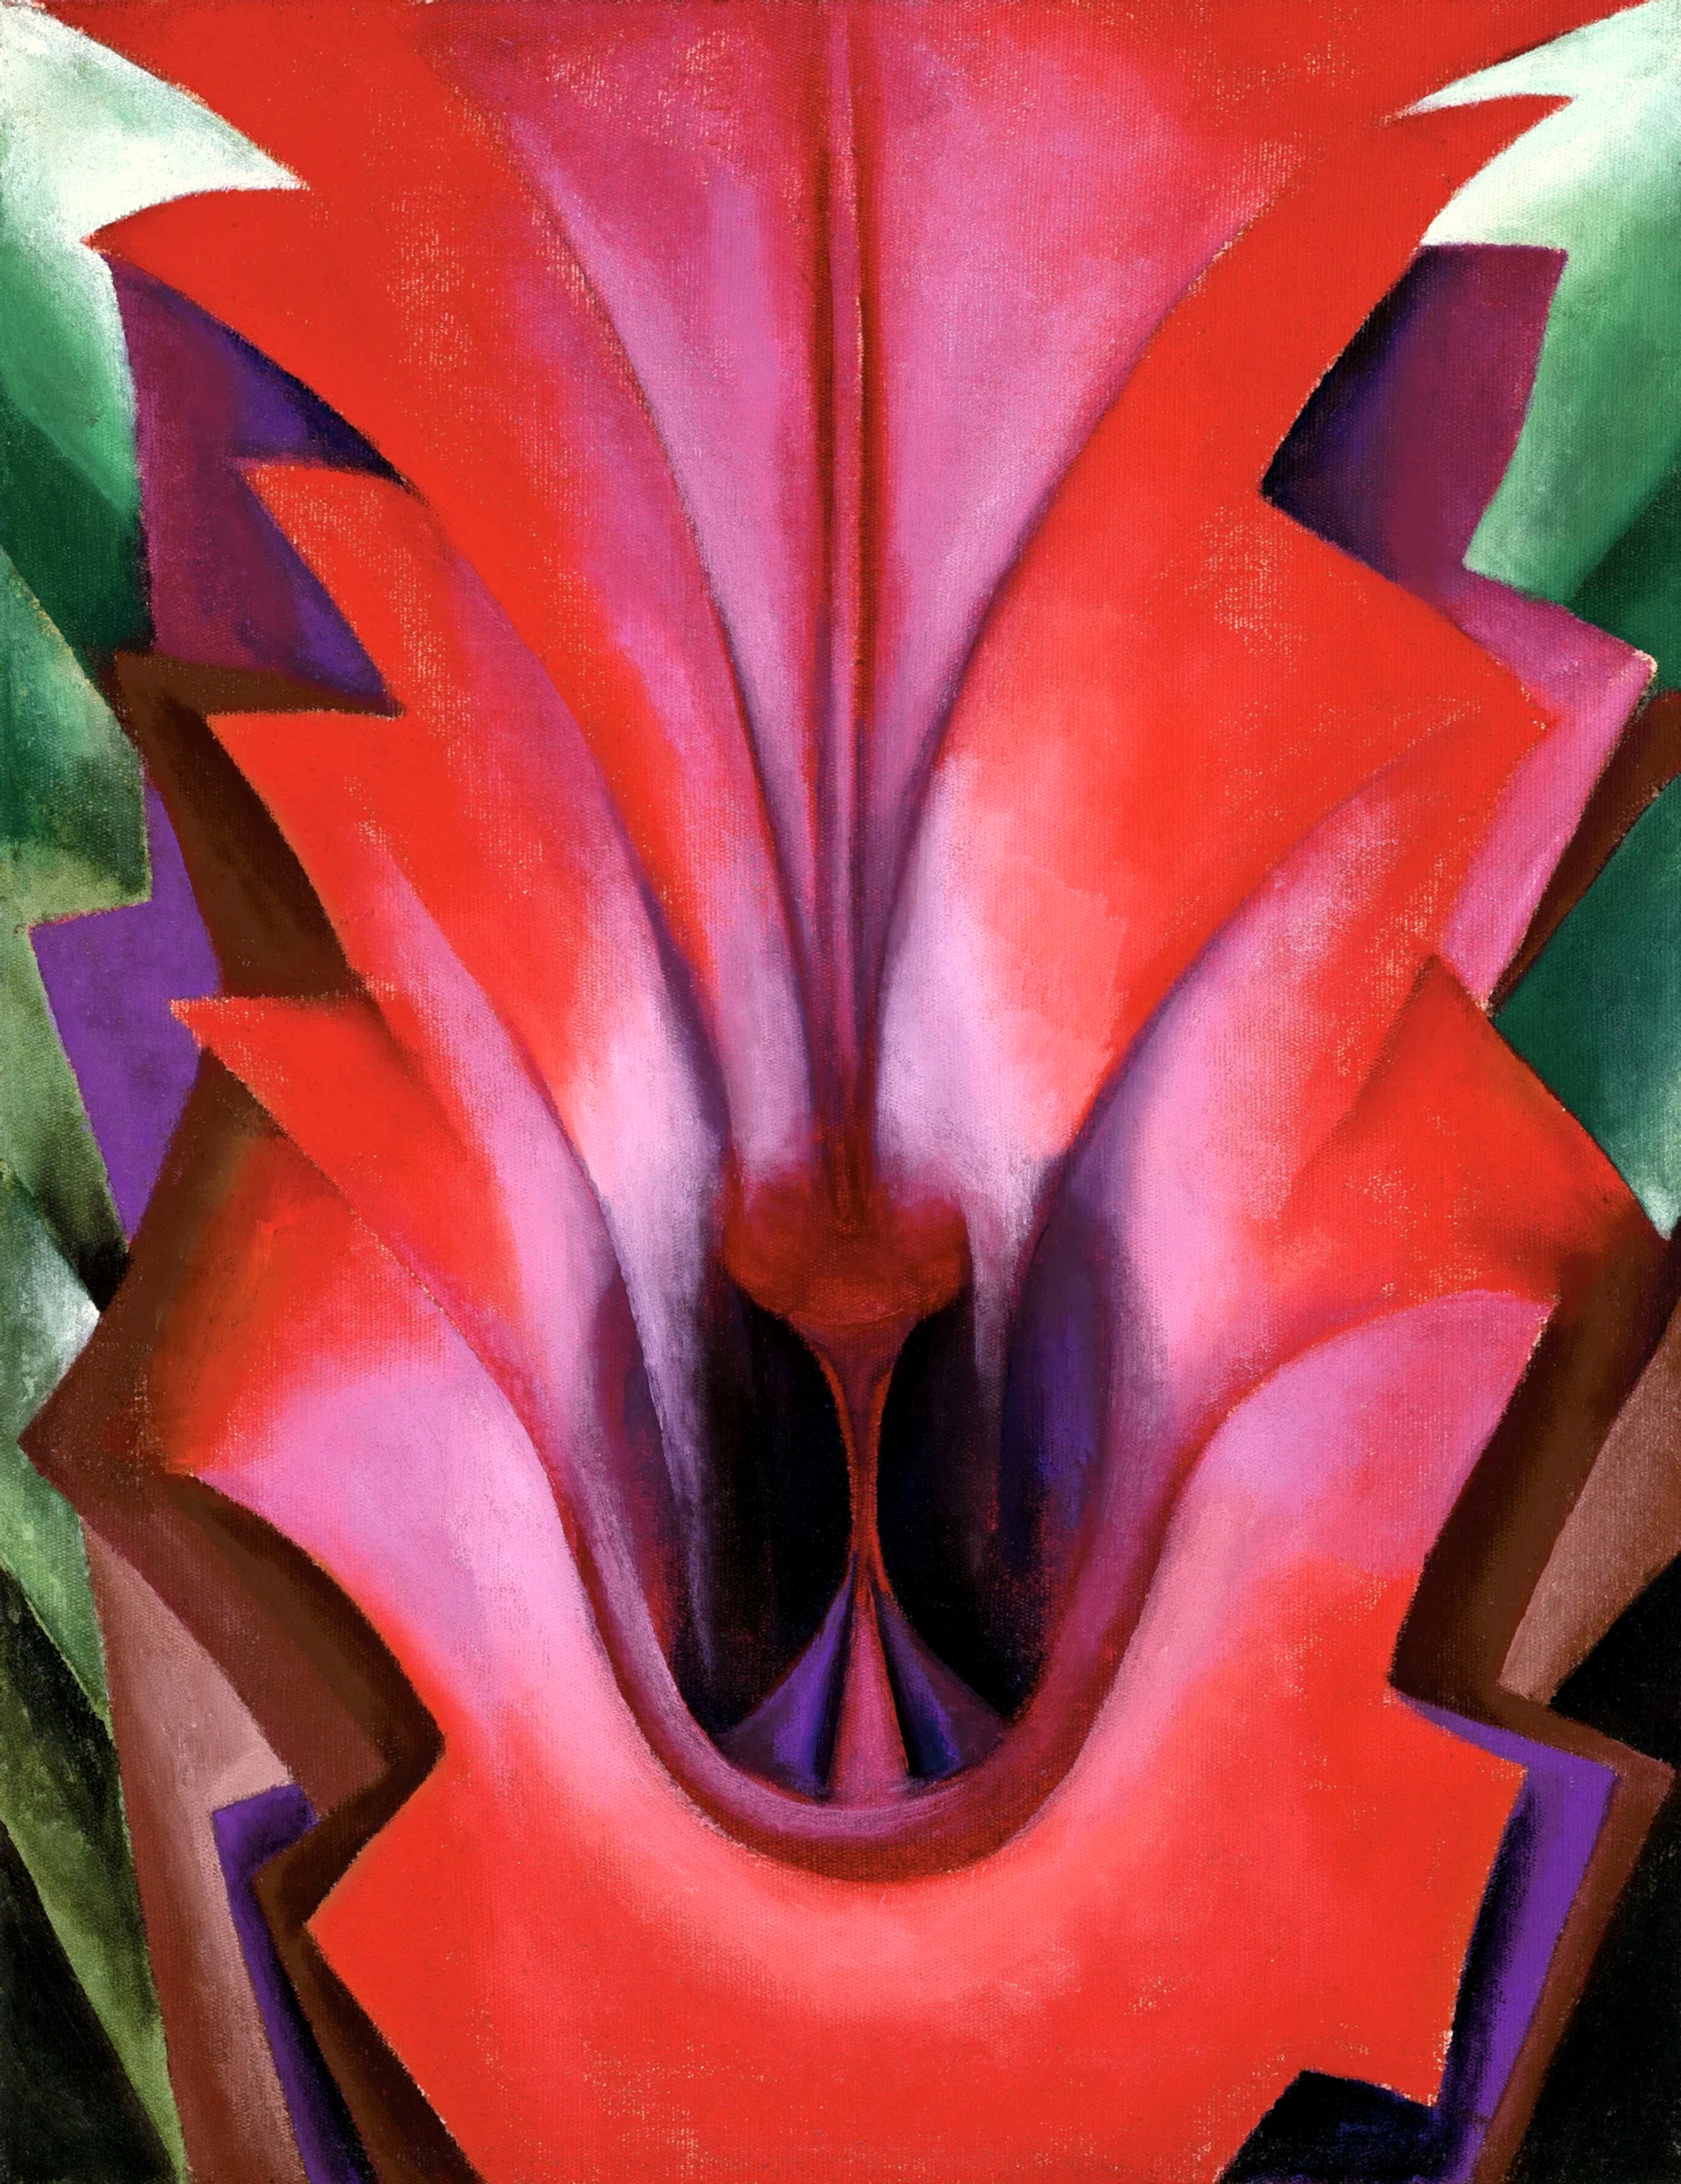 Georgia O'Keeffe painting "Inside Red Canna", painted 1919